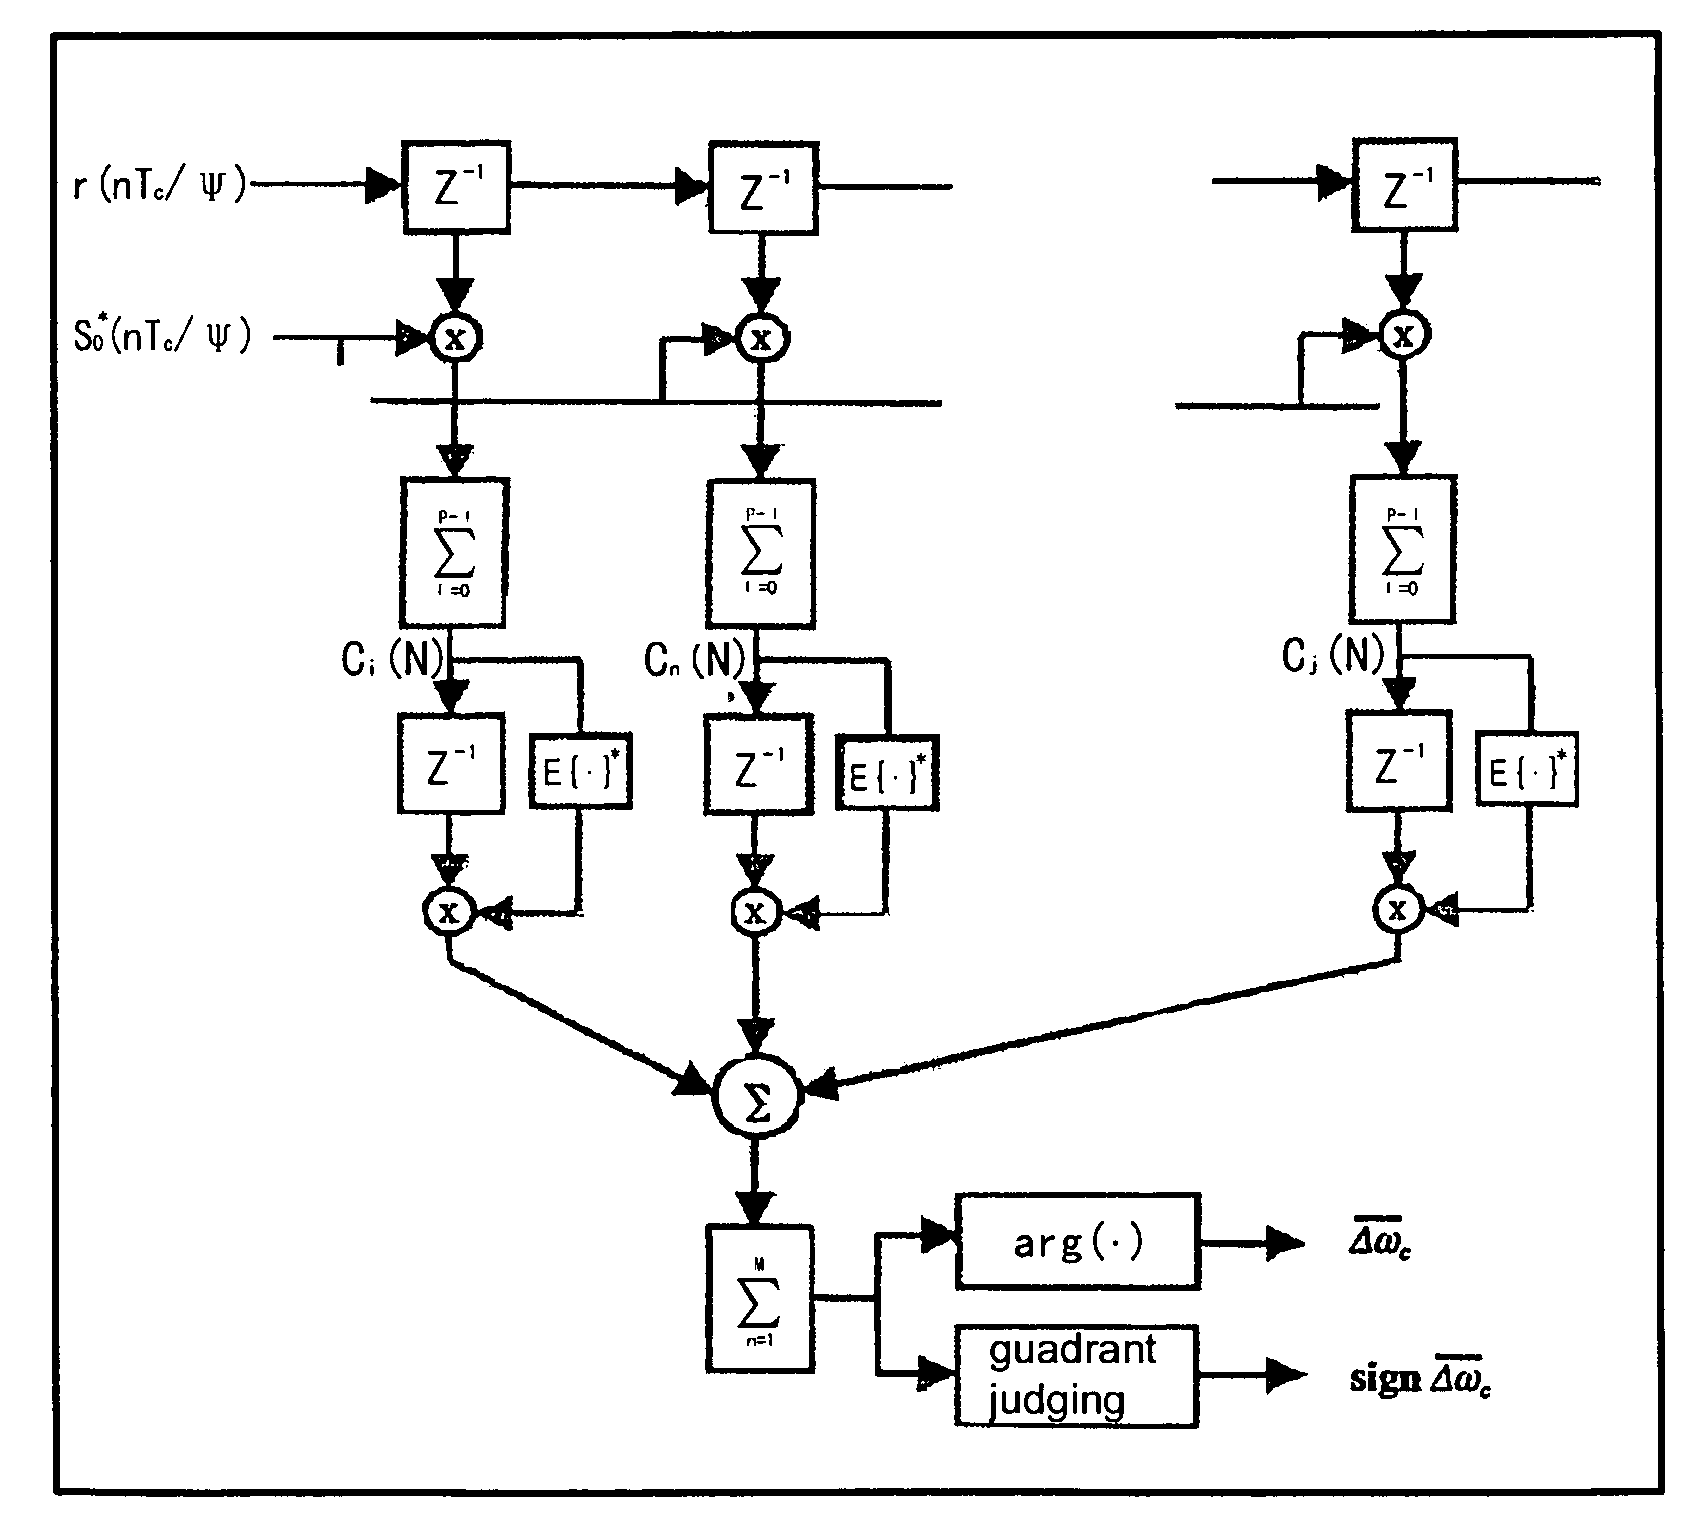 Frequency auto-correction apparatus for CDMA multipath fading channel